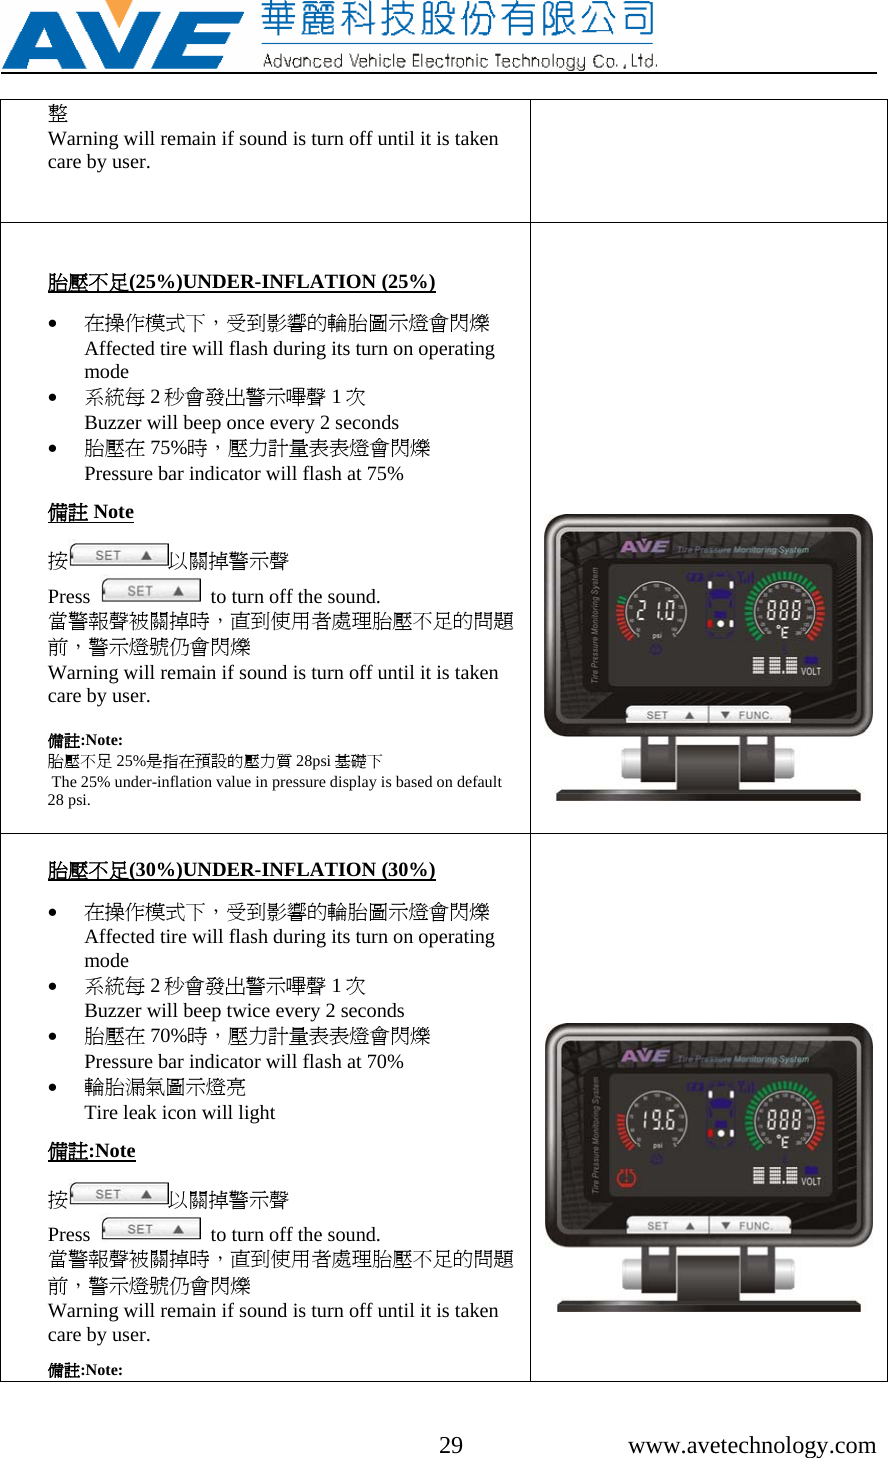     29 www.avetechnology.com 整 Warning will remain if sound is turn off until it is taken care by user.    胎壓不足(25%)UNDER-INFLATION (25%)  • 在操作模式下，受到影響的輪胎圖示燈會閃爍Affected tire will flash during its turn on operating mode • 系統每 2秒會發出警示嗶聲 1次                                Buzzer will beep once every 2 seconds • 胎壓在 75%時，壓力計量表表燈會閃爍               Pressure bar indicator will flash at 75%  備註 Note  按以關掉警示聲 Press     to turn off the sound. 當警報聲被關掉時，直到使用者處理胎壓不足的問題前，警示燈號仍會閃爍 Warning will remain if sound is turn off until it is taken care by user.  備註:Note:  胎壓不足 25%是指在預設的壓力質 28psi 基礎下  The 25% under-inflation value in pressure display is based on default 28 psi.      胎壓不足(30%)UNDER-INFLATION (30%)  • 在操作模式下，受到影響的輪胎圖示燈會閃爍Affected tire will flash during its turn on operating mode • 系統每 2秒會發出警示嗶聲 1次                                Buzzer will beep twice every 2 seconds • 胎壓在 70%時，壓力計量表表燈會閃爍               Pressure bar indicator will flash at 70% • 輪胎漏氣圖示燈亮                                                Tire leak icon will light  備註:Note  按以關掉警示聲 Press     to turn off the sound. 當警報聲被關掉時，直到使用者處理胎壓不足的問題前，警示燈號仍會閃爍 Warning will remain if sound is turn off until it is taken care by user.  備註:Note:      